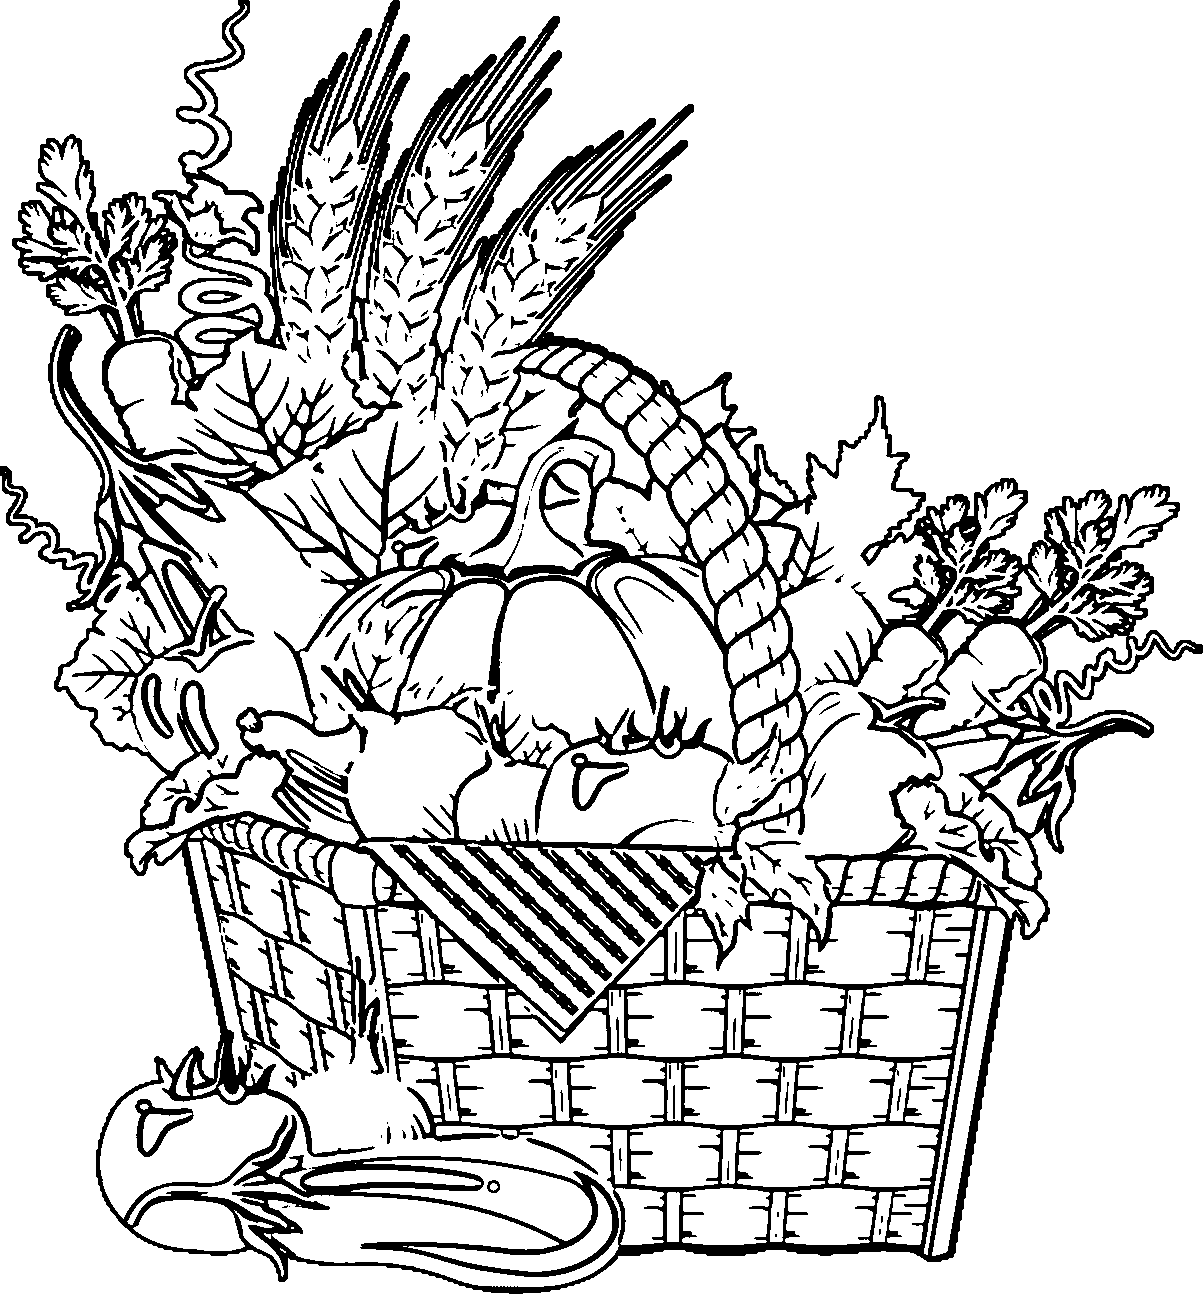 fruits and vegetables coloring book fruit picture to print and color fruit coloring pages book coloring vegetables fruits and 